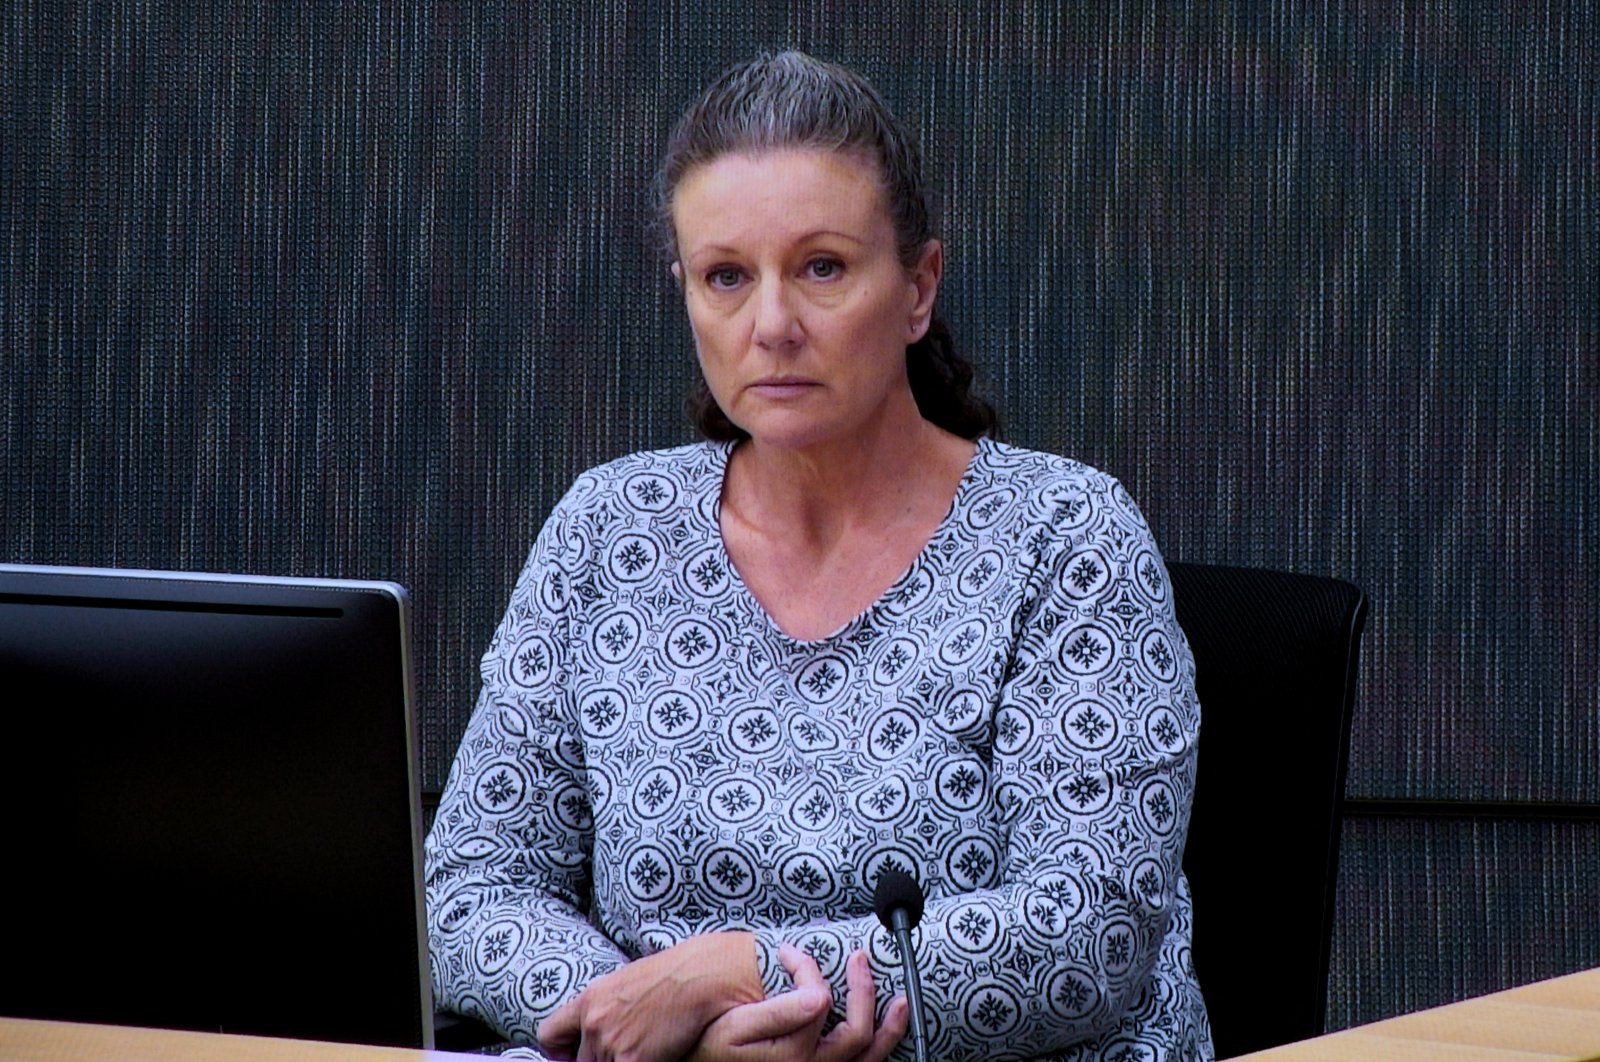 Kathleen Folbigg appears via video link during a convictions inquiry at the NSW Coroners Court, Sydney, Australia, May 1, 2019. (Reuters Photo)